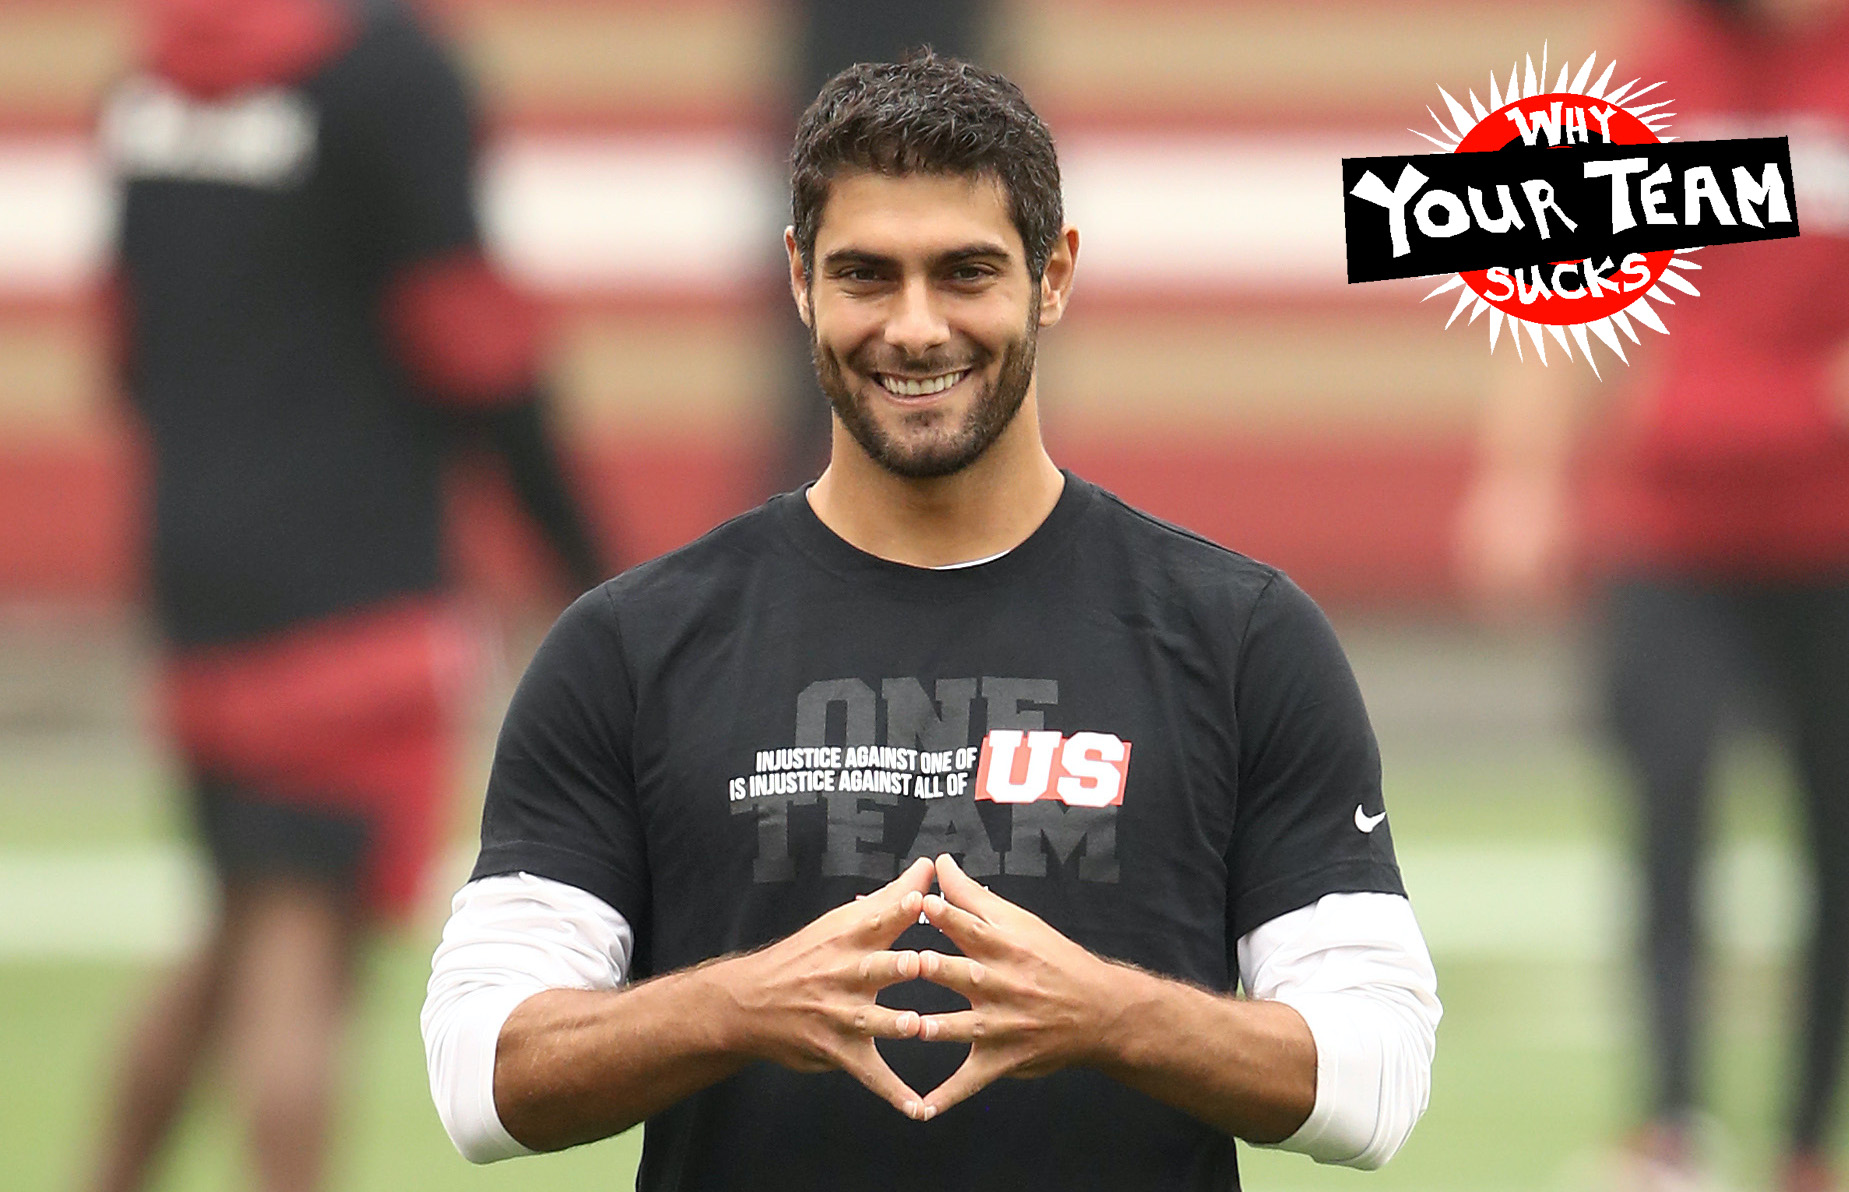 SANTA CLARA, CALIFORNIA - SEPTEMBER 13: Jimmy Garoppolo #10 of the San Francisco 49ers warms up before their game against the Arizona Cardinals at Levi's Stadium on September 13, 2020 in Santa Clara, California. (Photo by )